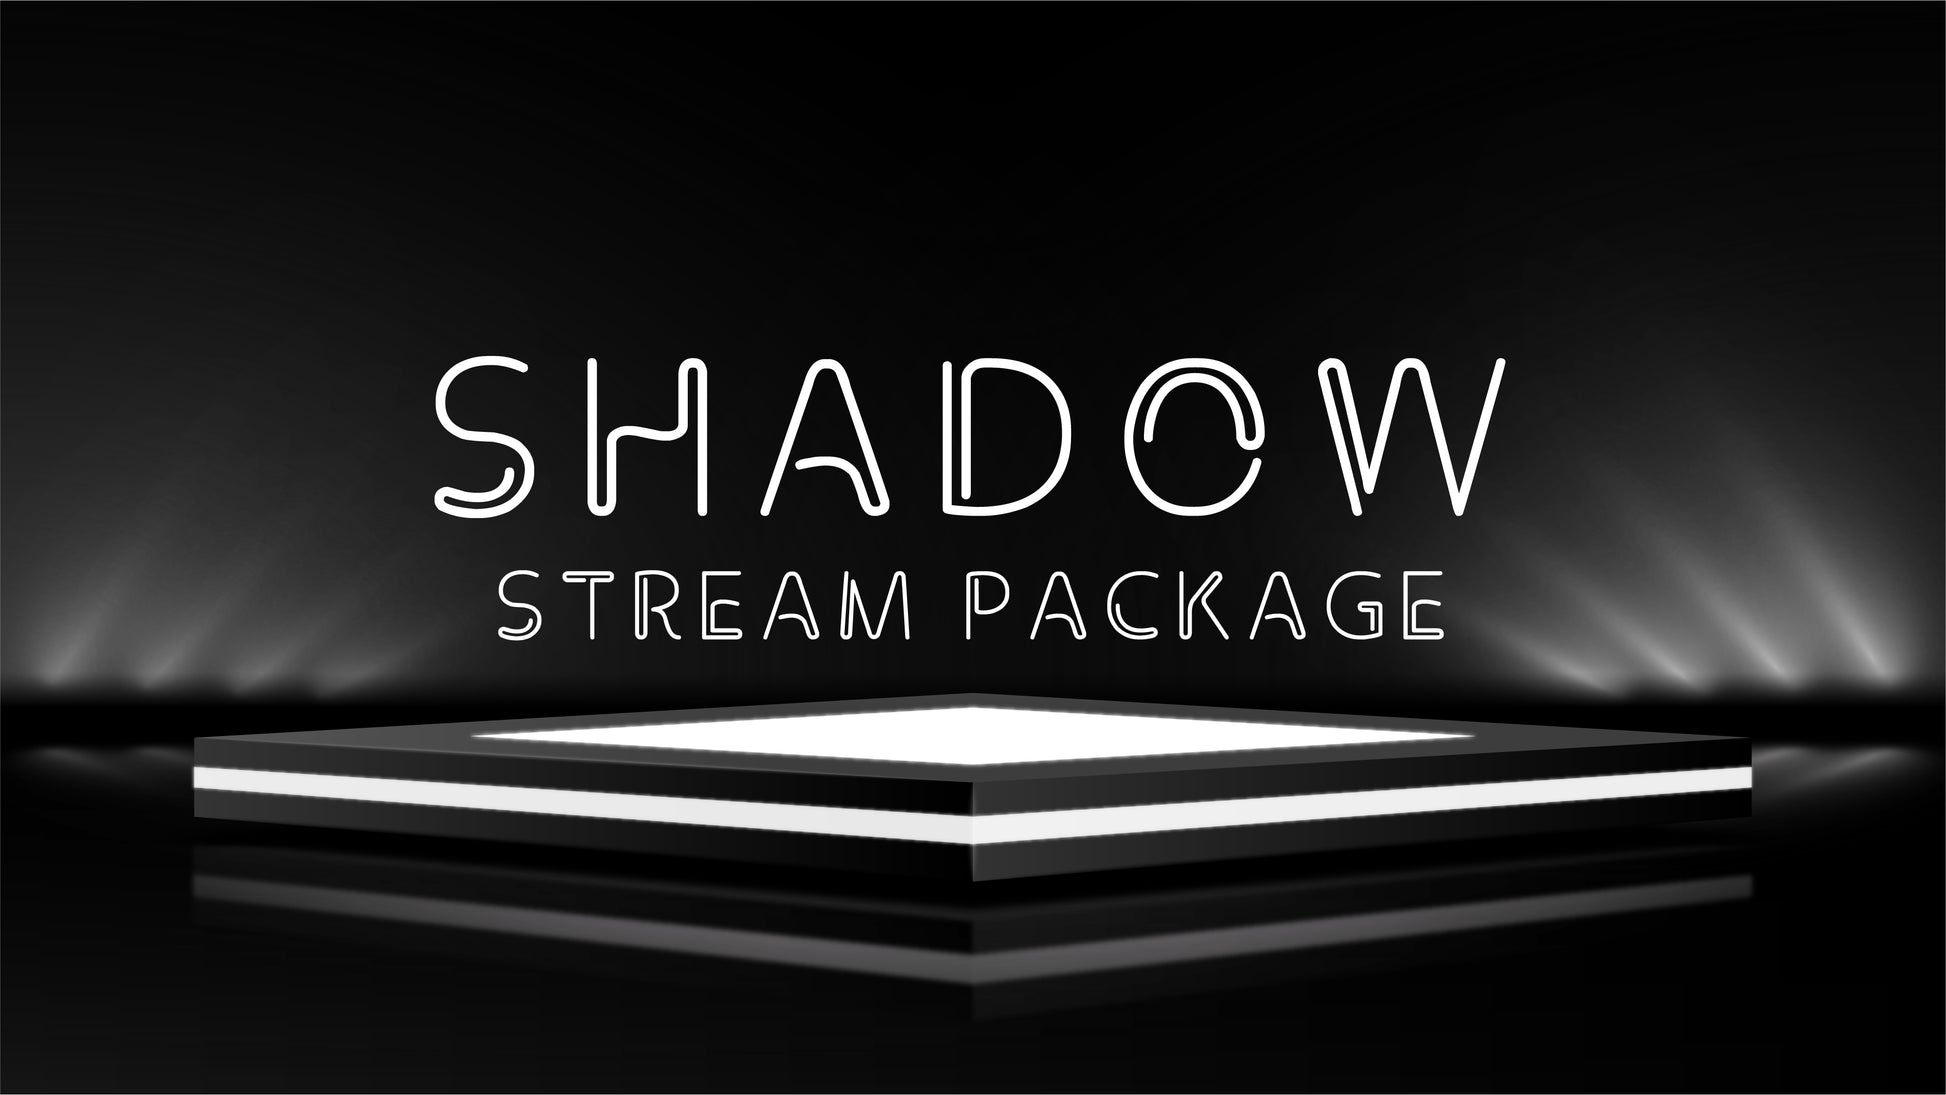 Static stream overlay package shadow thumbnail stream designz